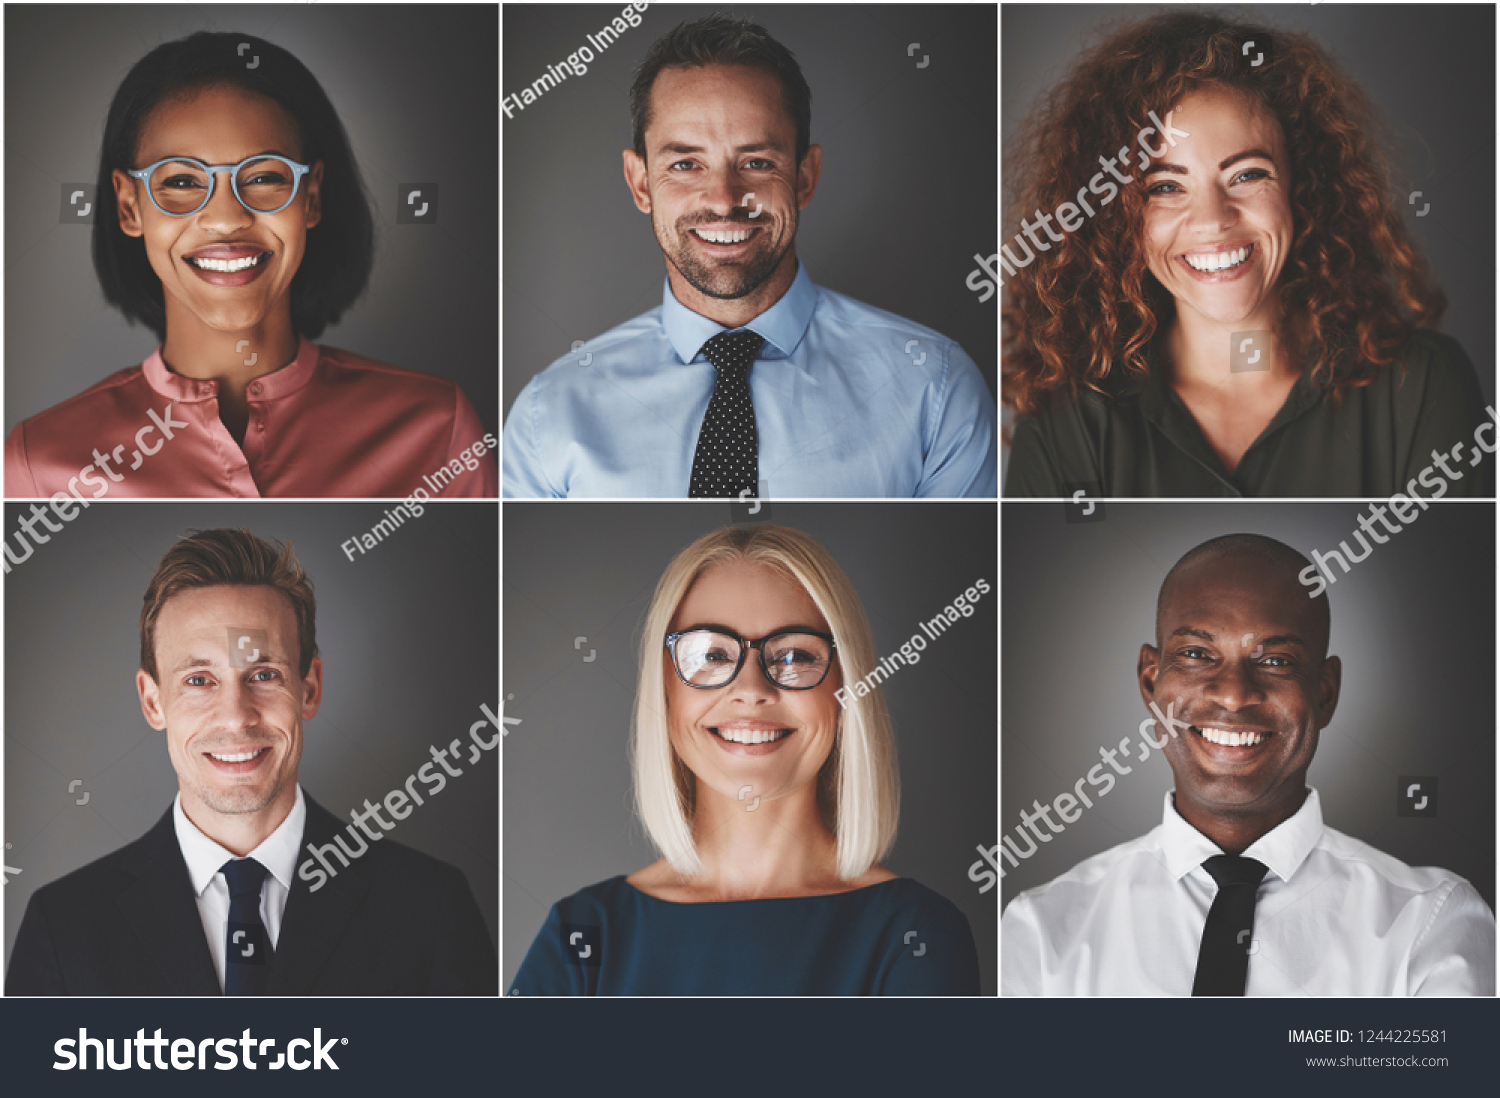 Collage of an ethnically diverse group of smiling businessmen and businesswomen against a gray background #1244225581